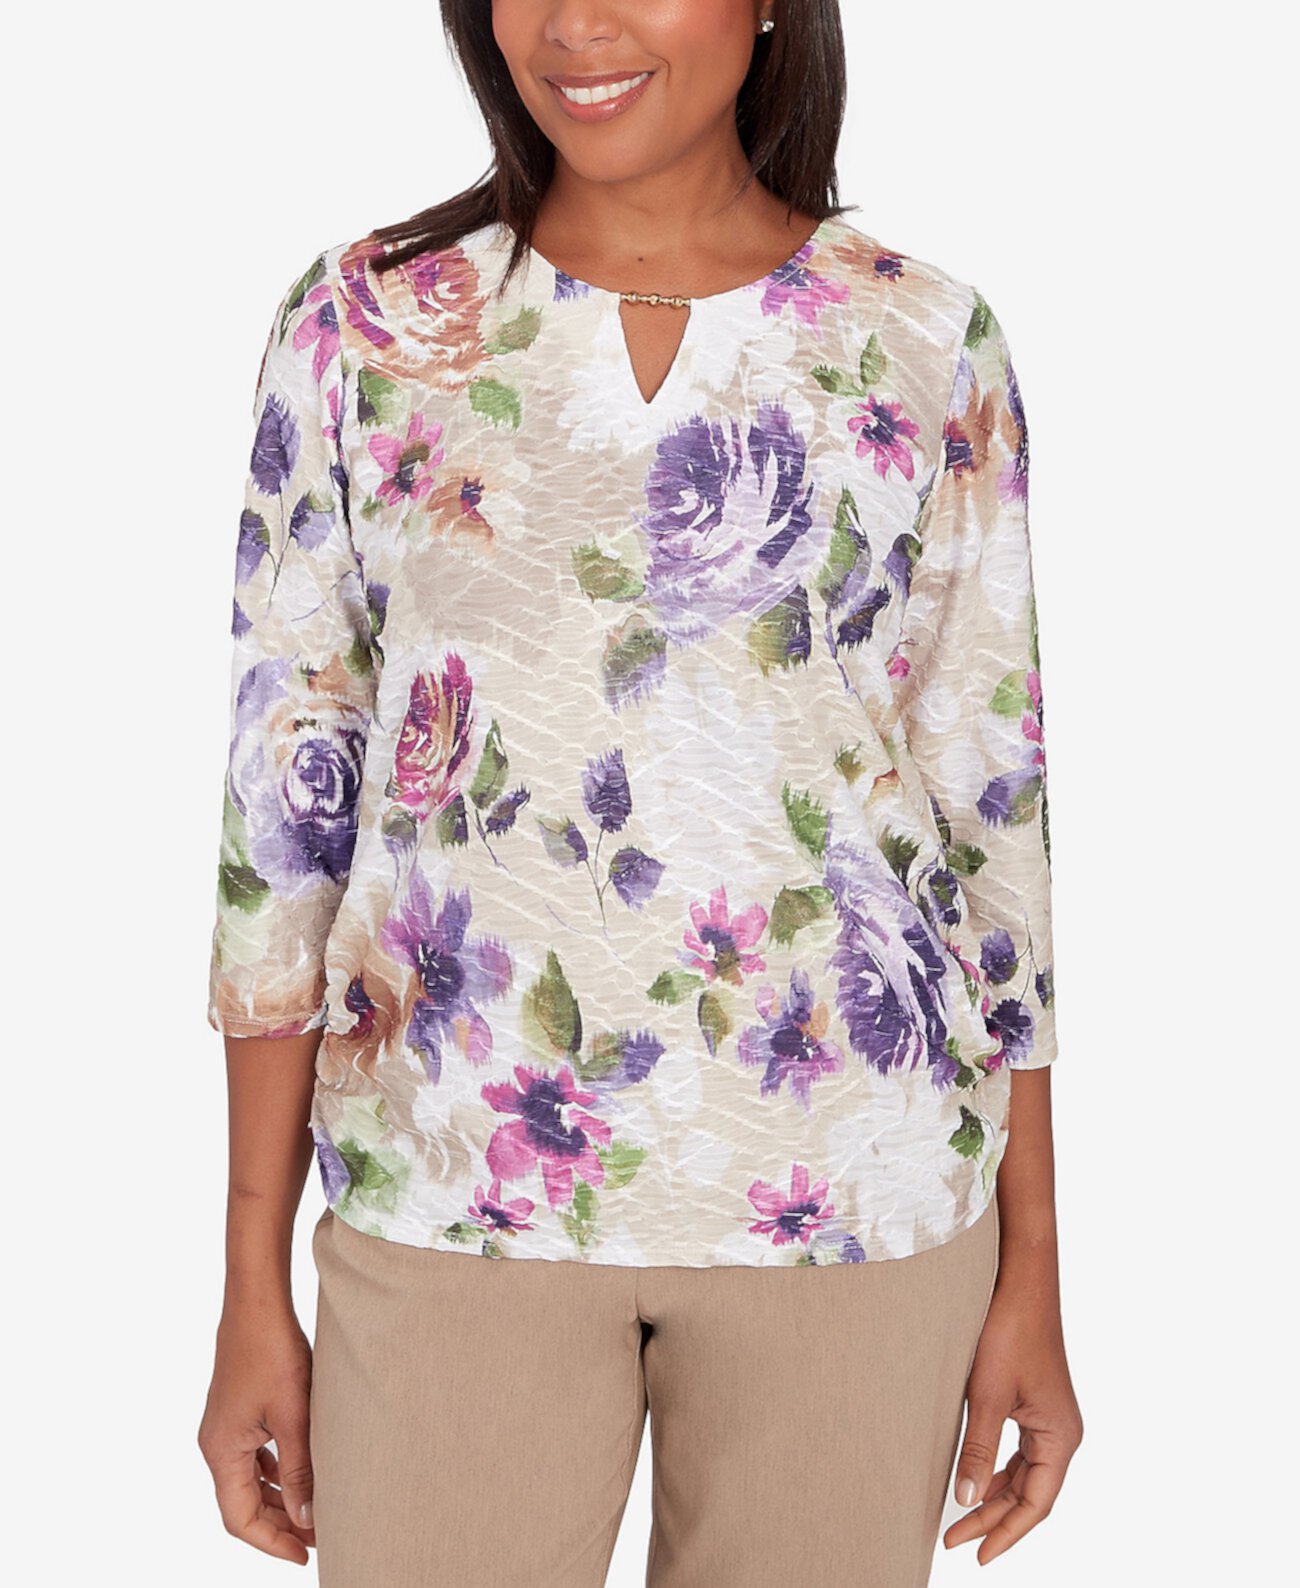 Charm School Women's Embellished Keyhole Floral Textured Top Alfred Dunner